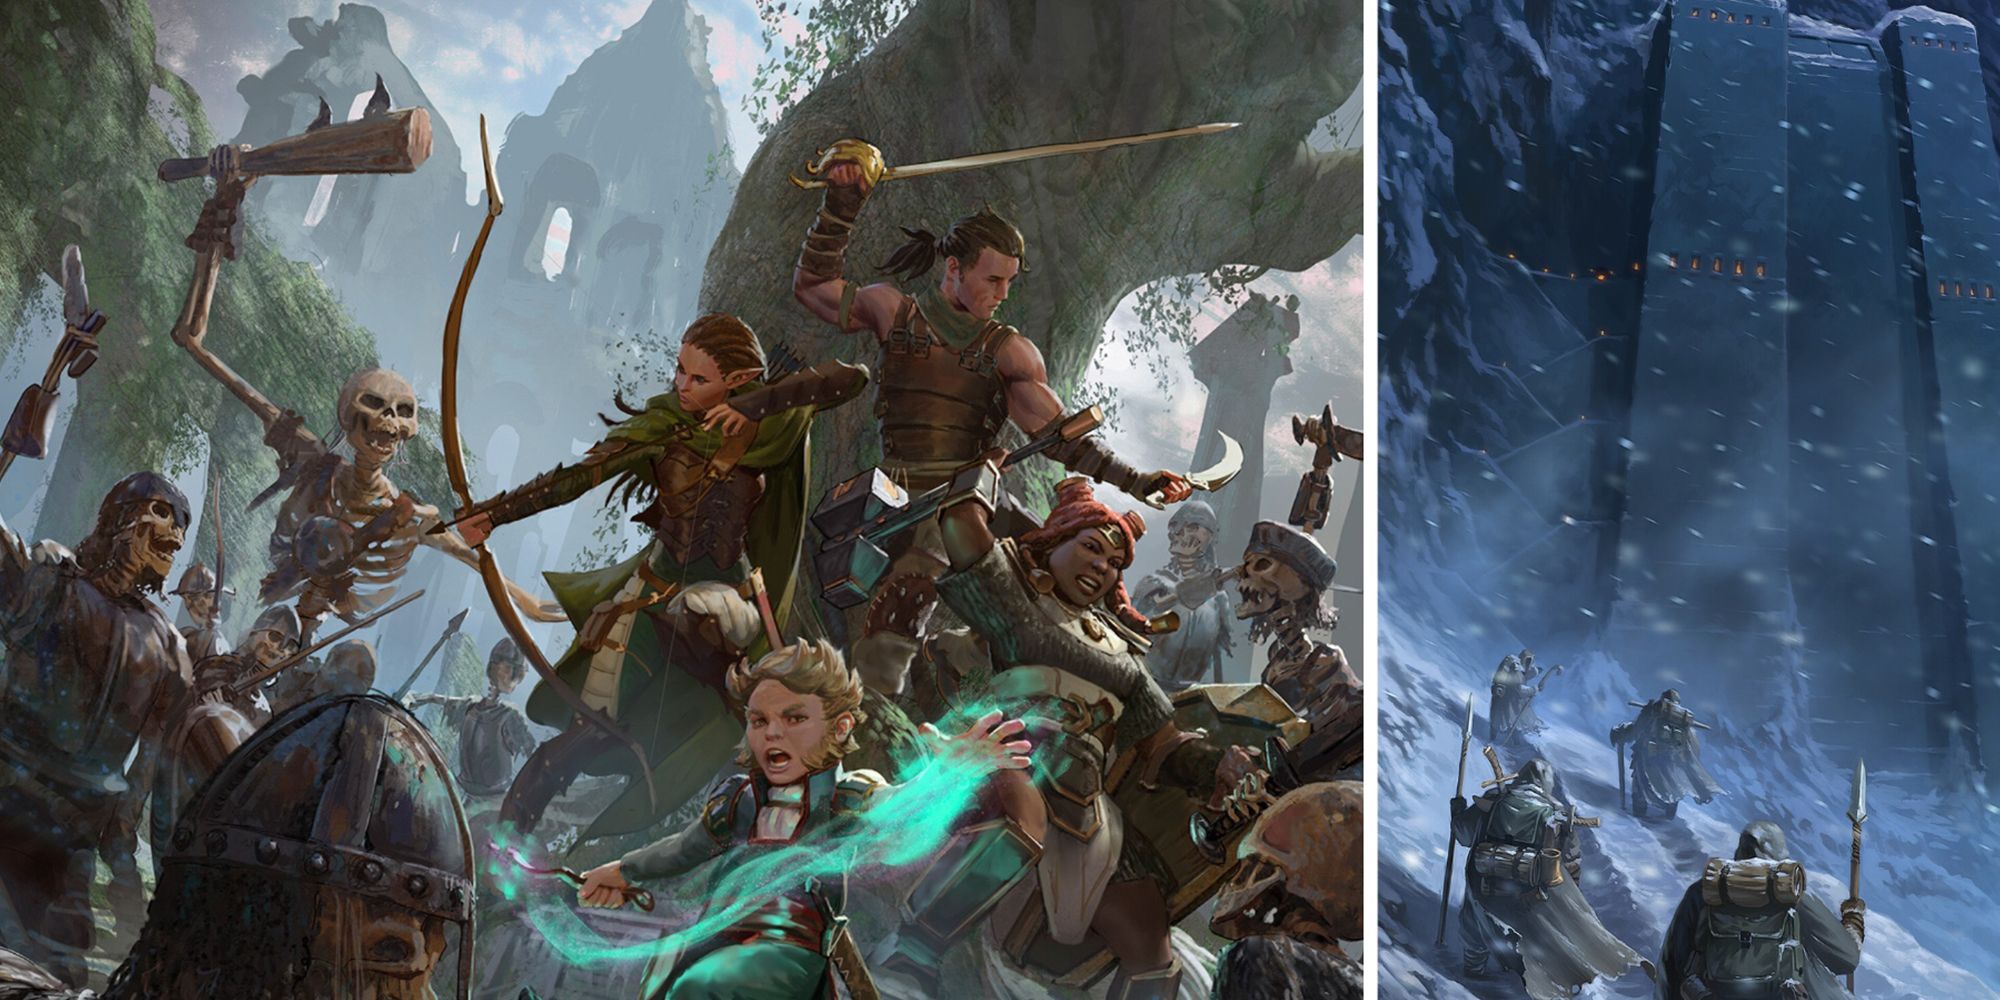 On the left, a D&D party of four battling a group of undead. On the right, a D&D party of four traveling through a blizzard.